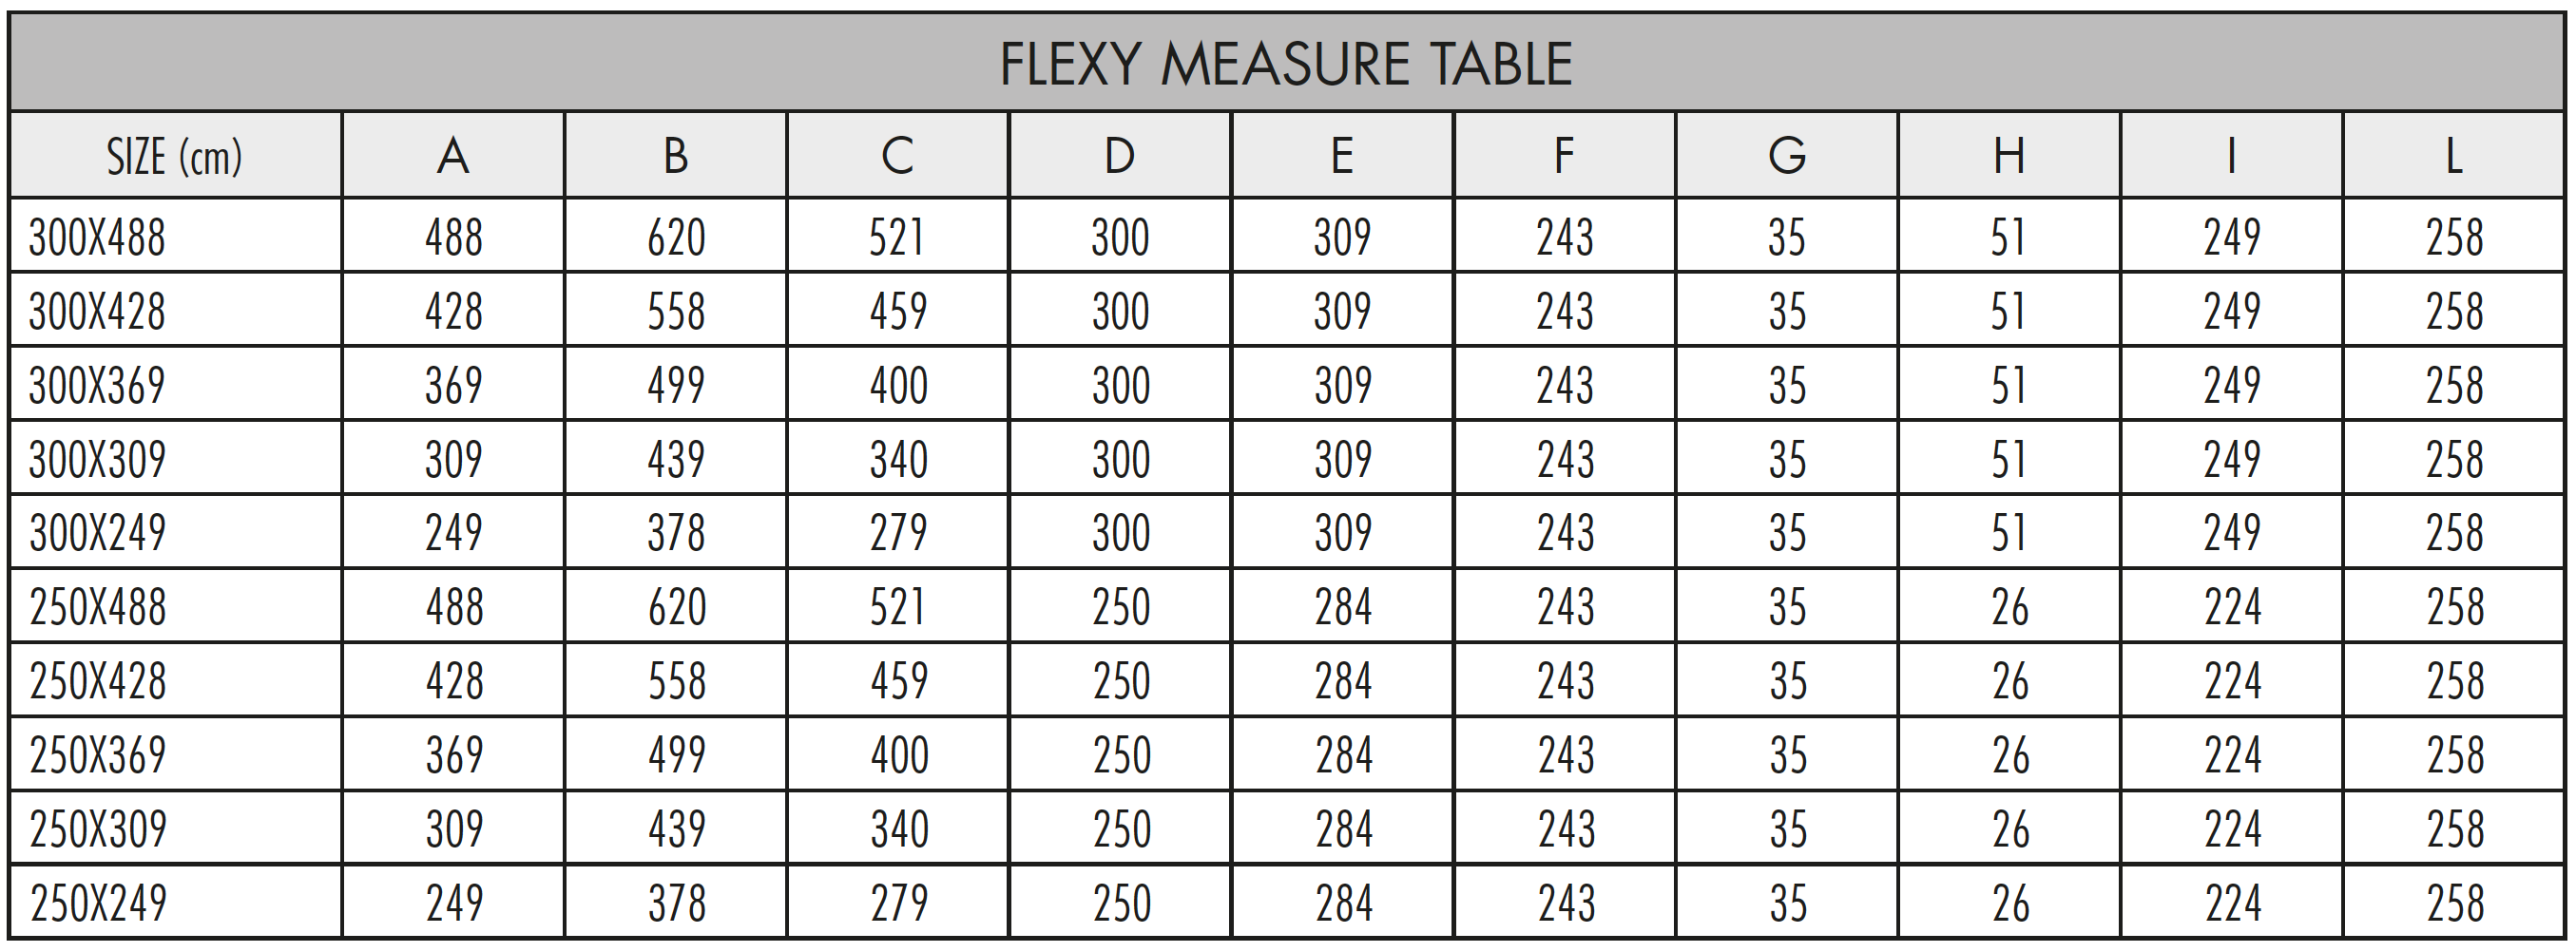 Dimensions Chart for Flexy Shade System by Fim